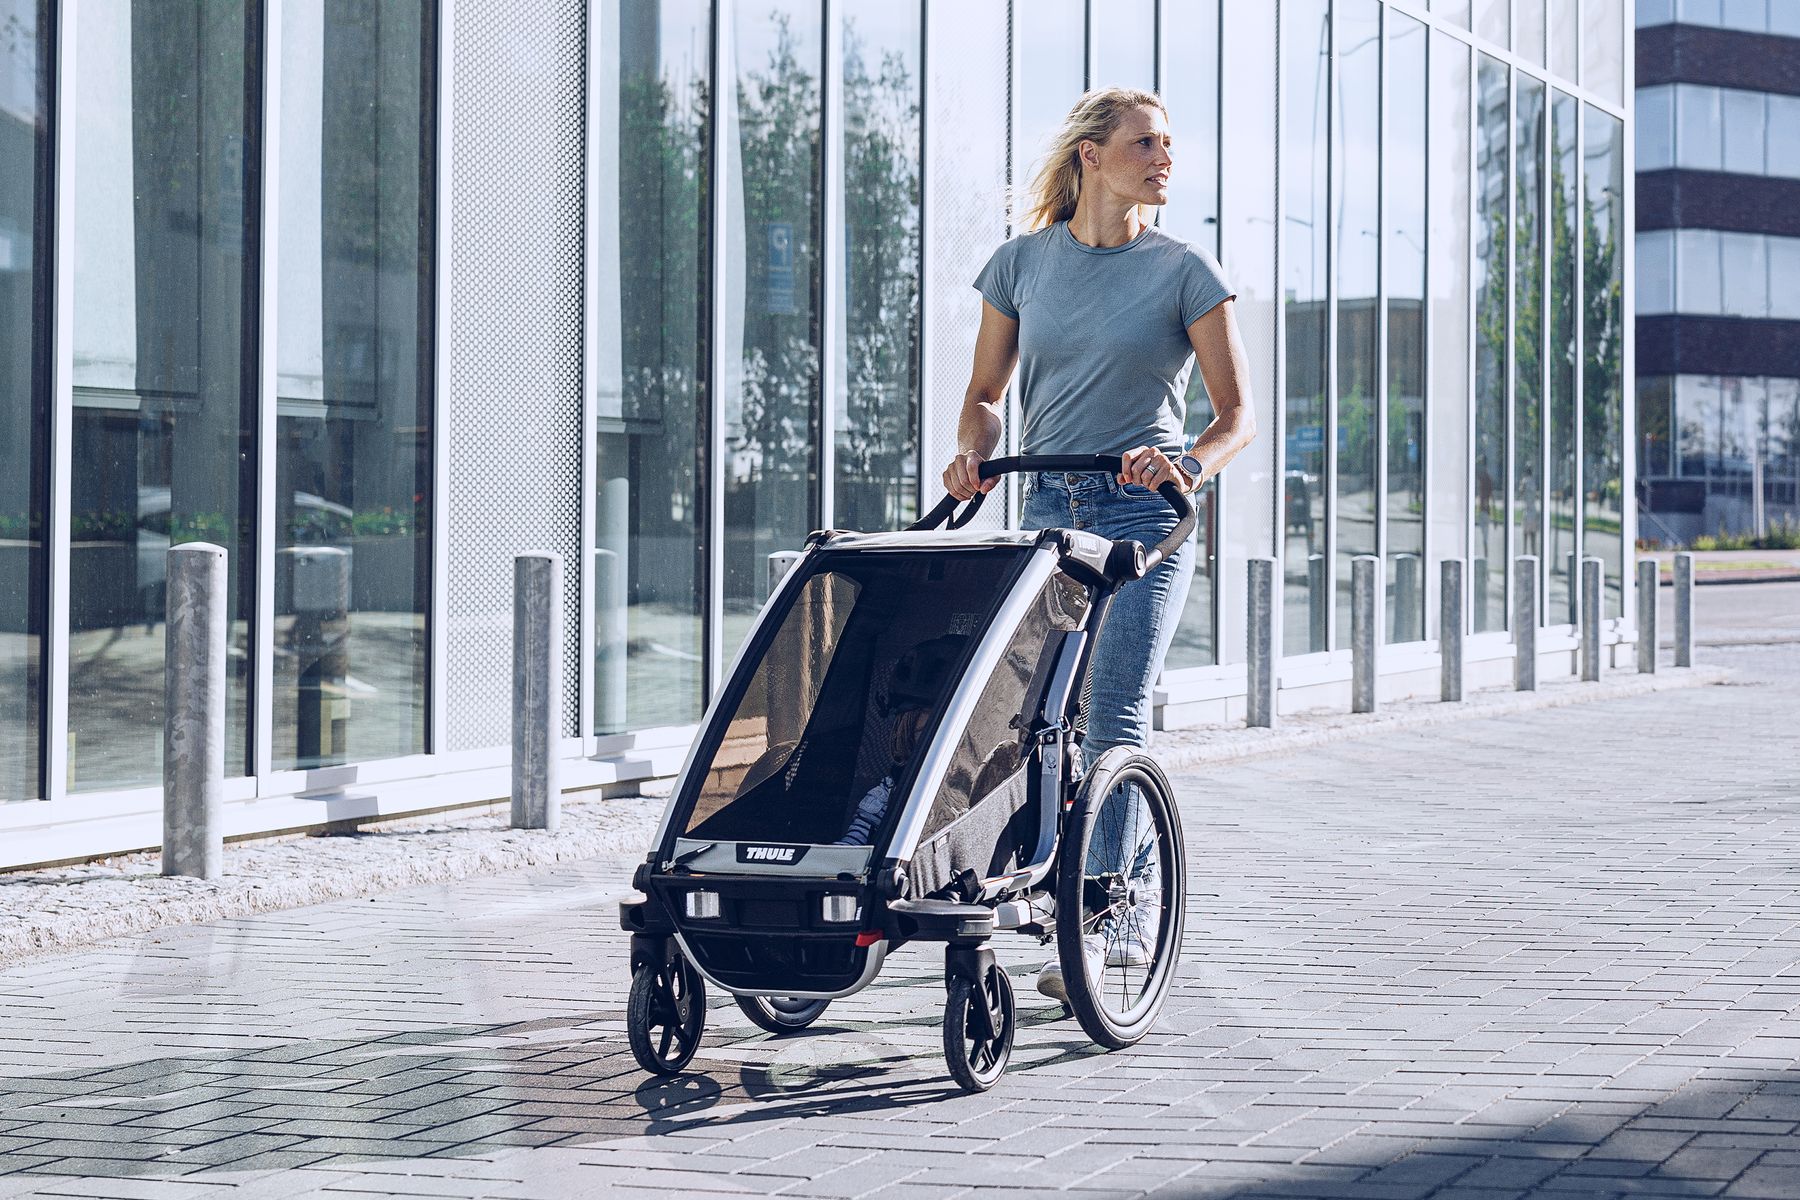 Chariot Thule Chariot Bicycle Cycle Bike Trailer Body COR1 Apricot 12 872299033379 